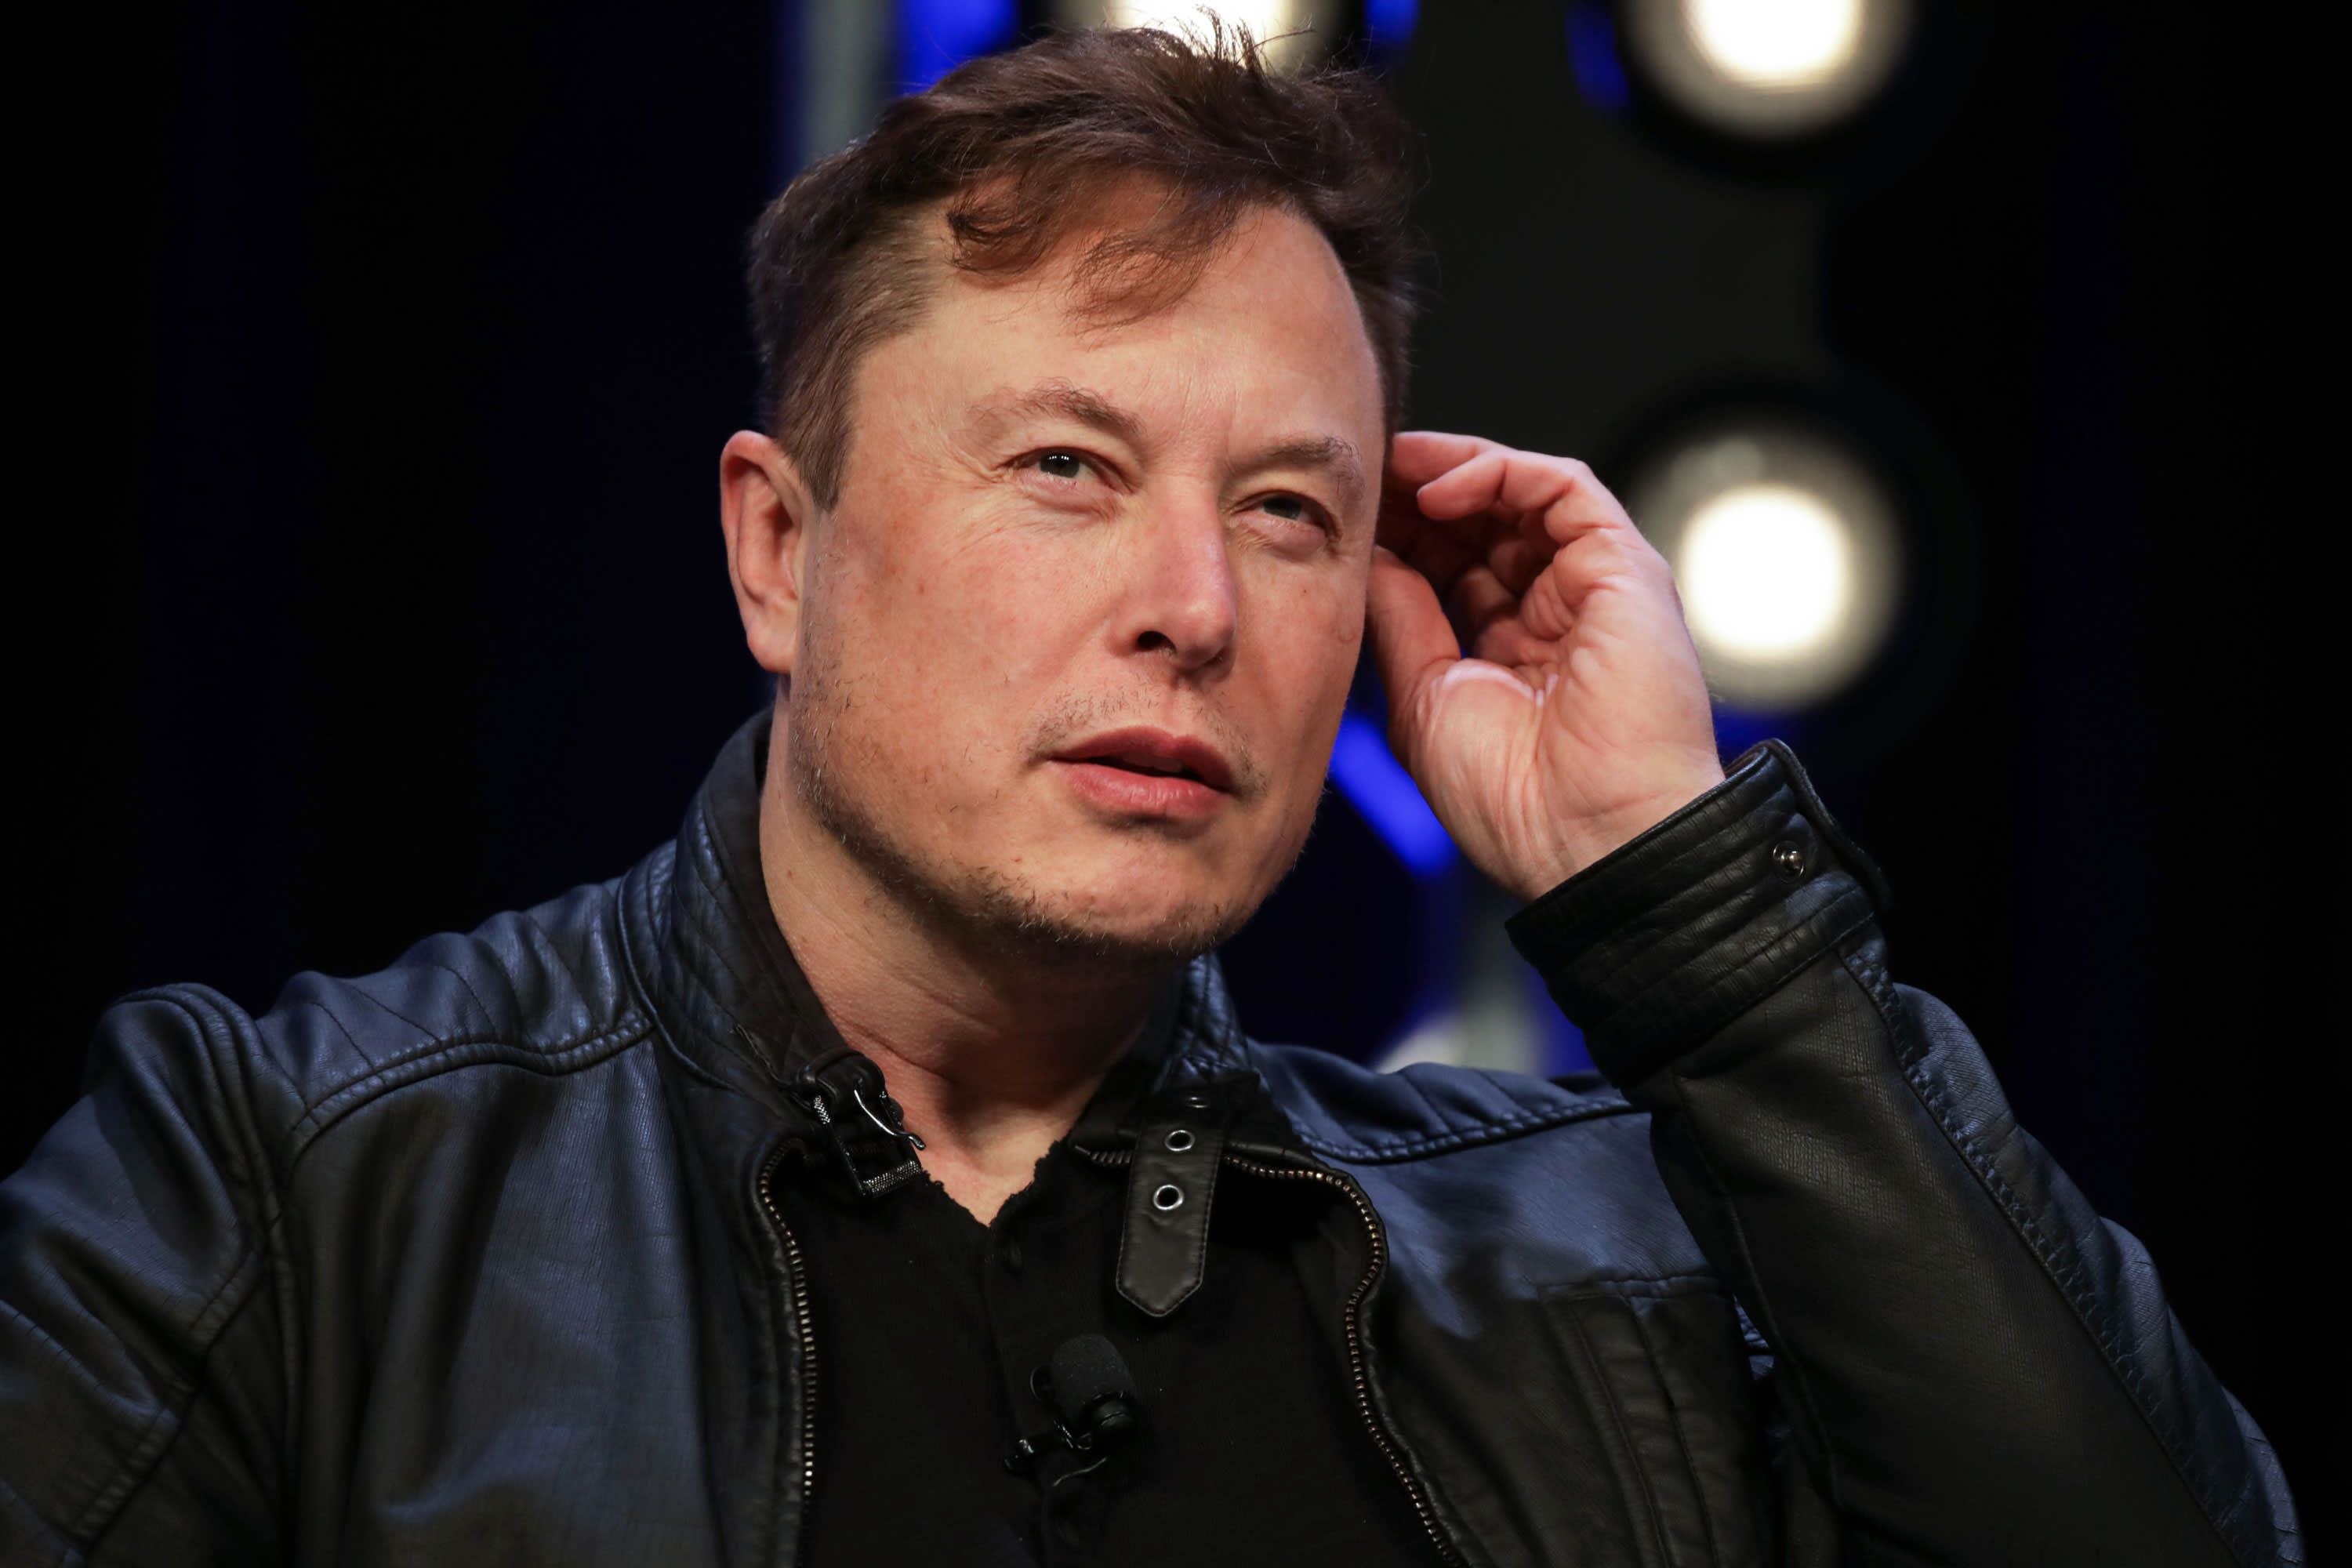 Tesla calls for order to delete Elon Musk tweet about unions